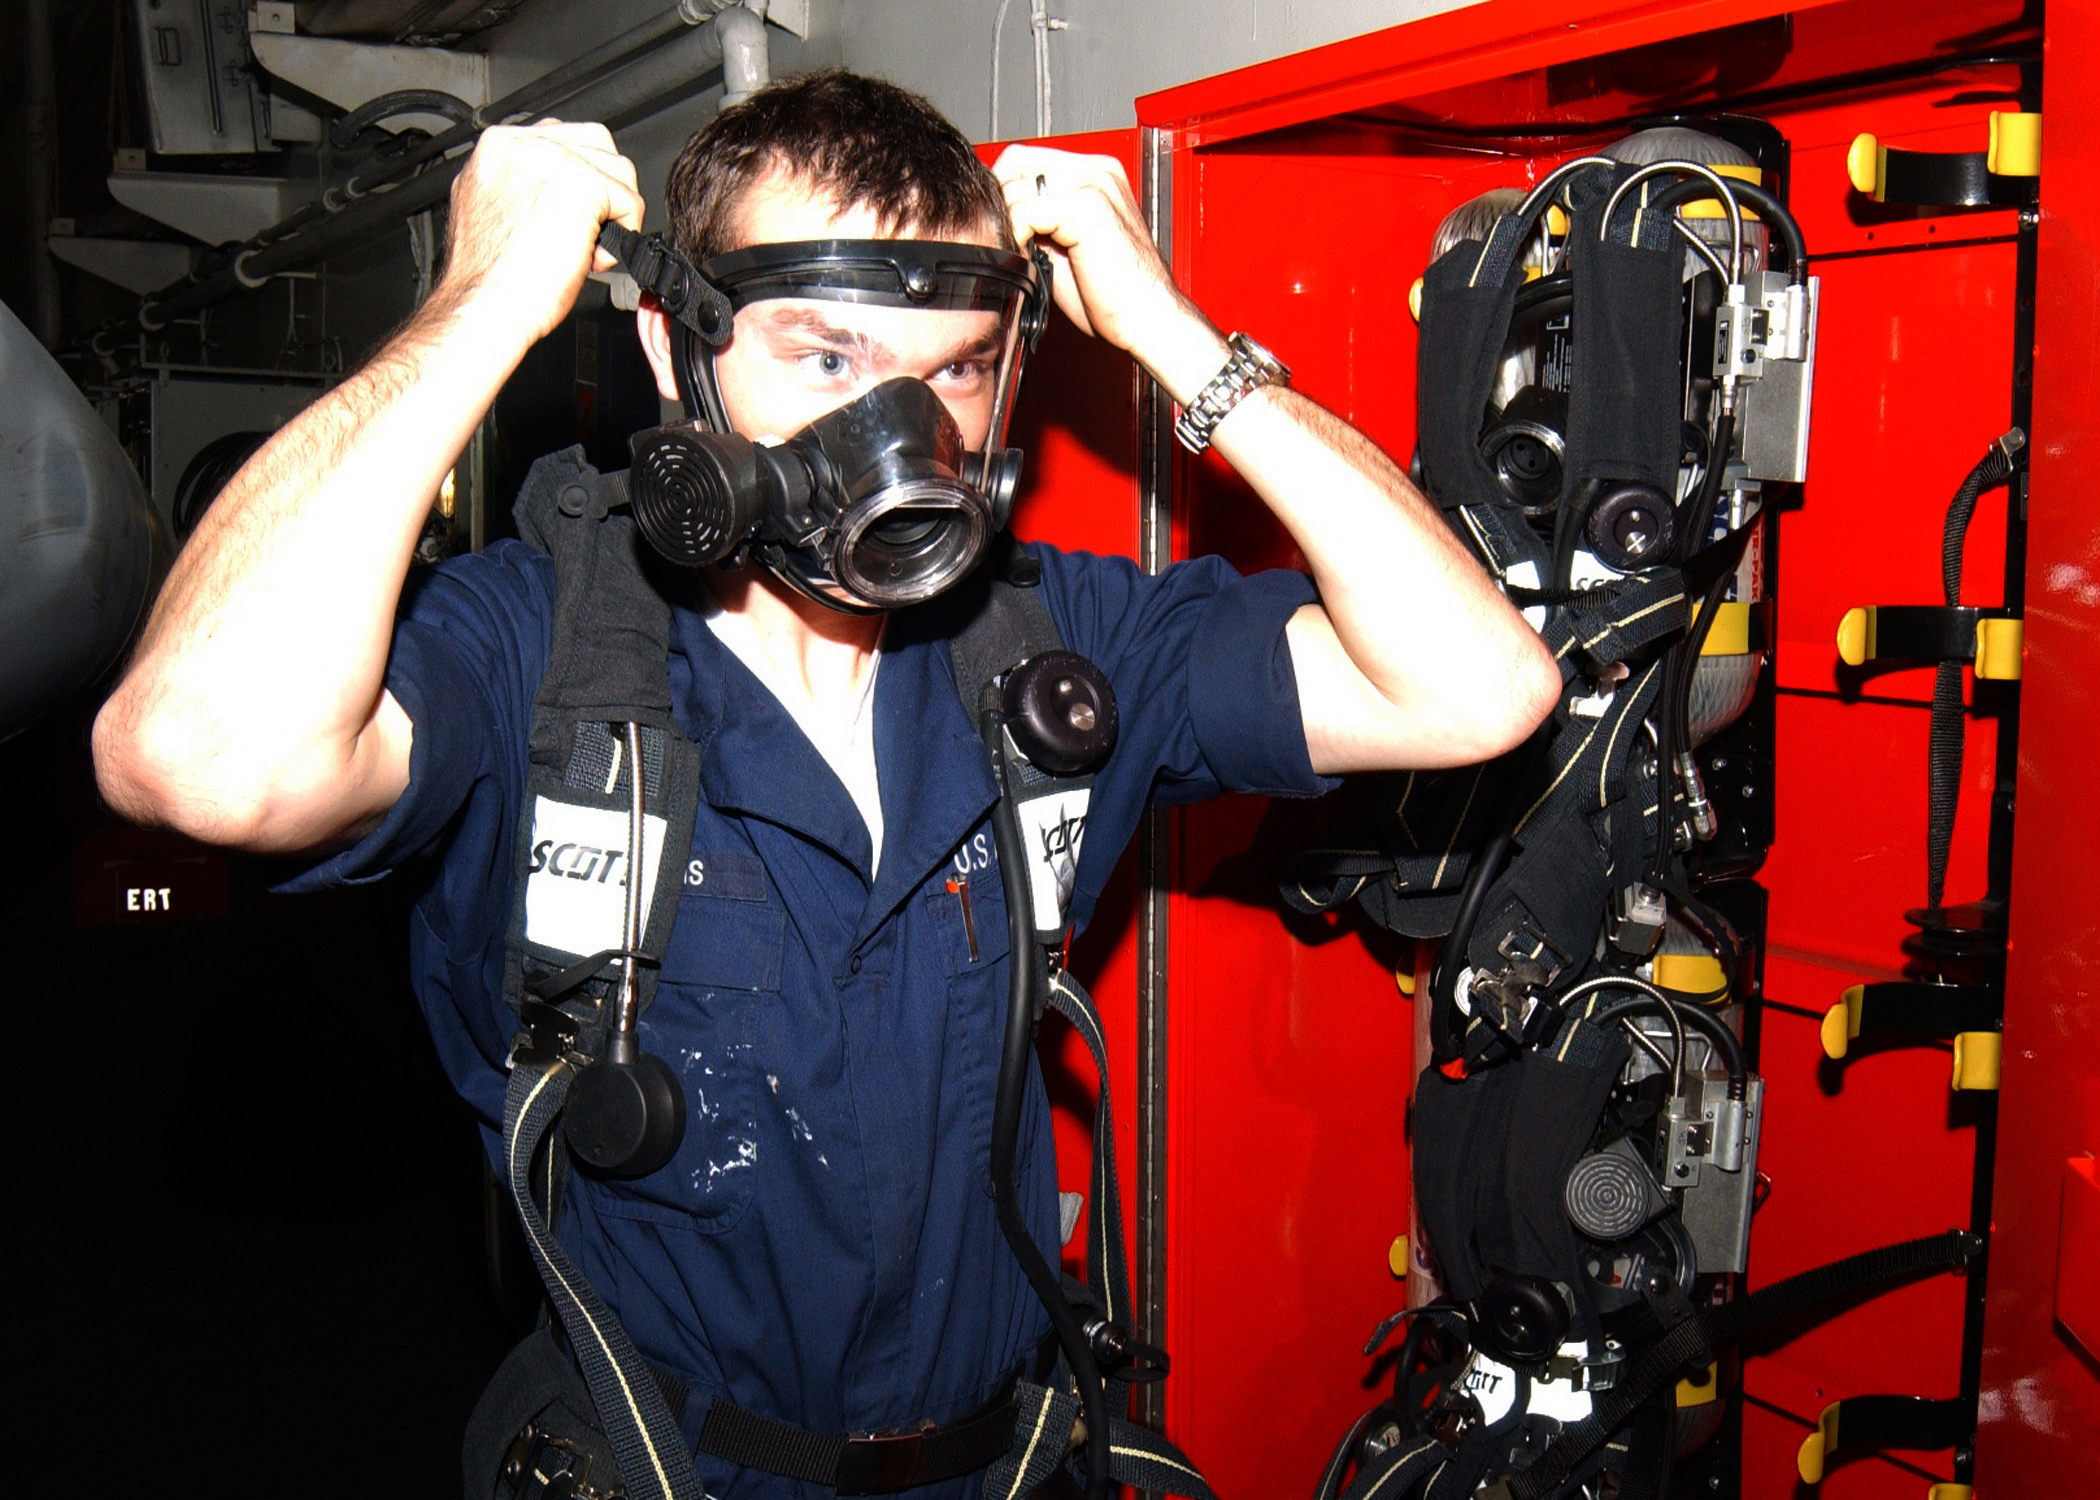 US Navy 021102-N-6817C-005 Damage Controlman Fireman Aaron Williams, of Amarillo, Texas, checks for the proper fit on a face mask on a Self Contained Breathing Apparatus (SCBA)